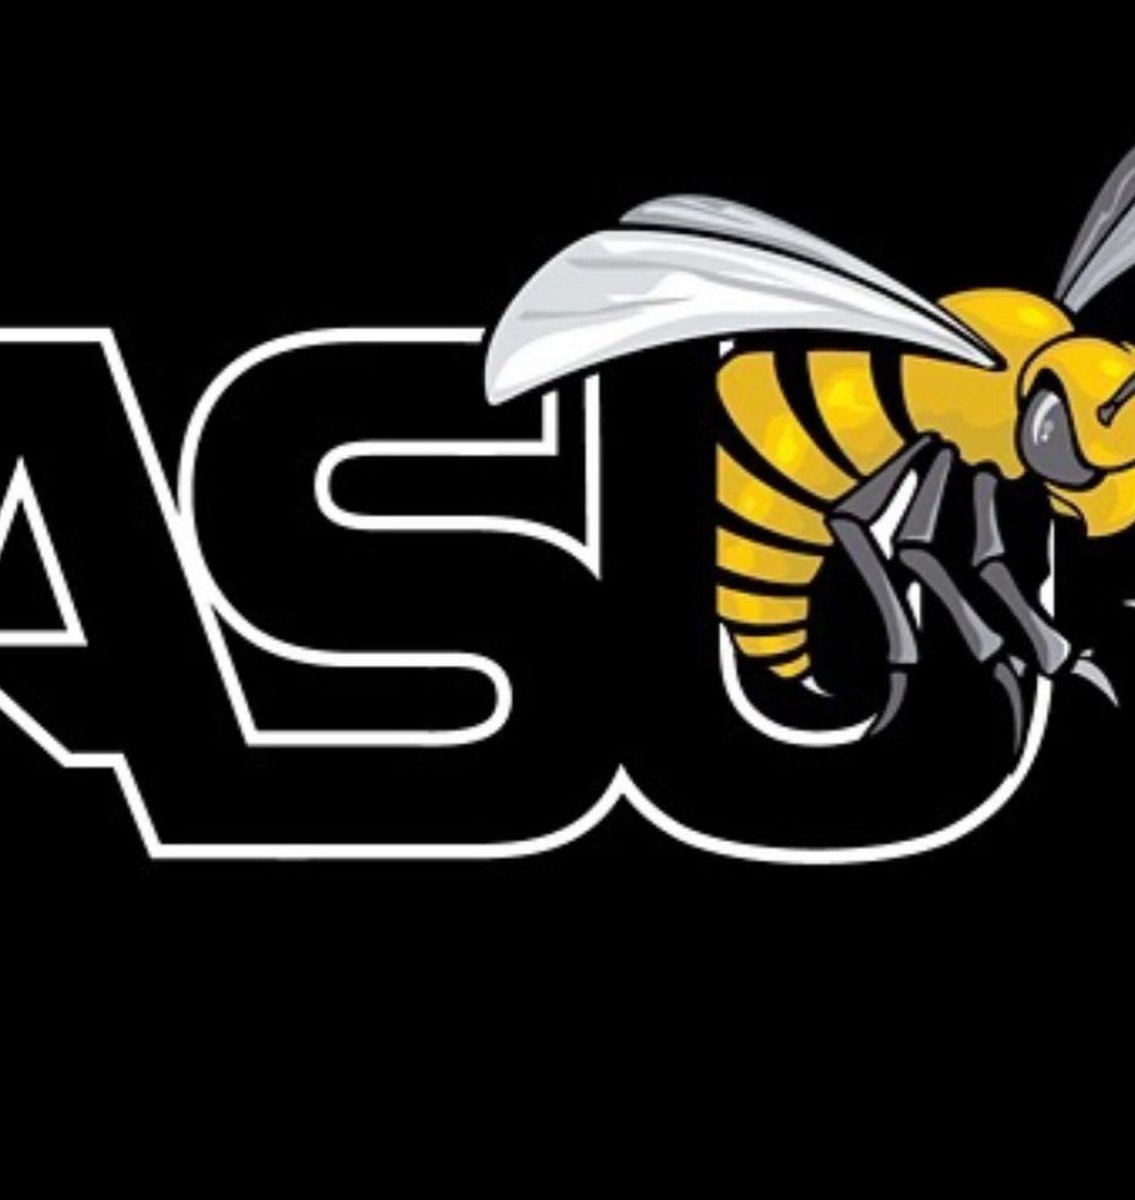 After a great conversation with @coachjcarrtmb im blessed to receive a offer from Alabama State🐝⚫️🟡 @coachcook55 @coachmaye3